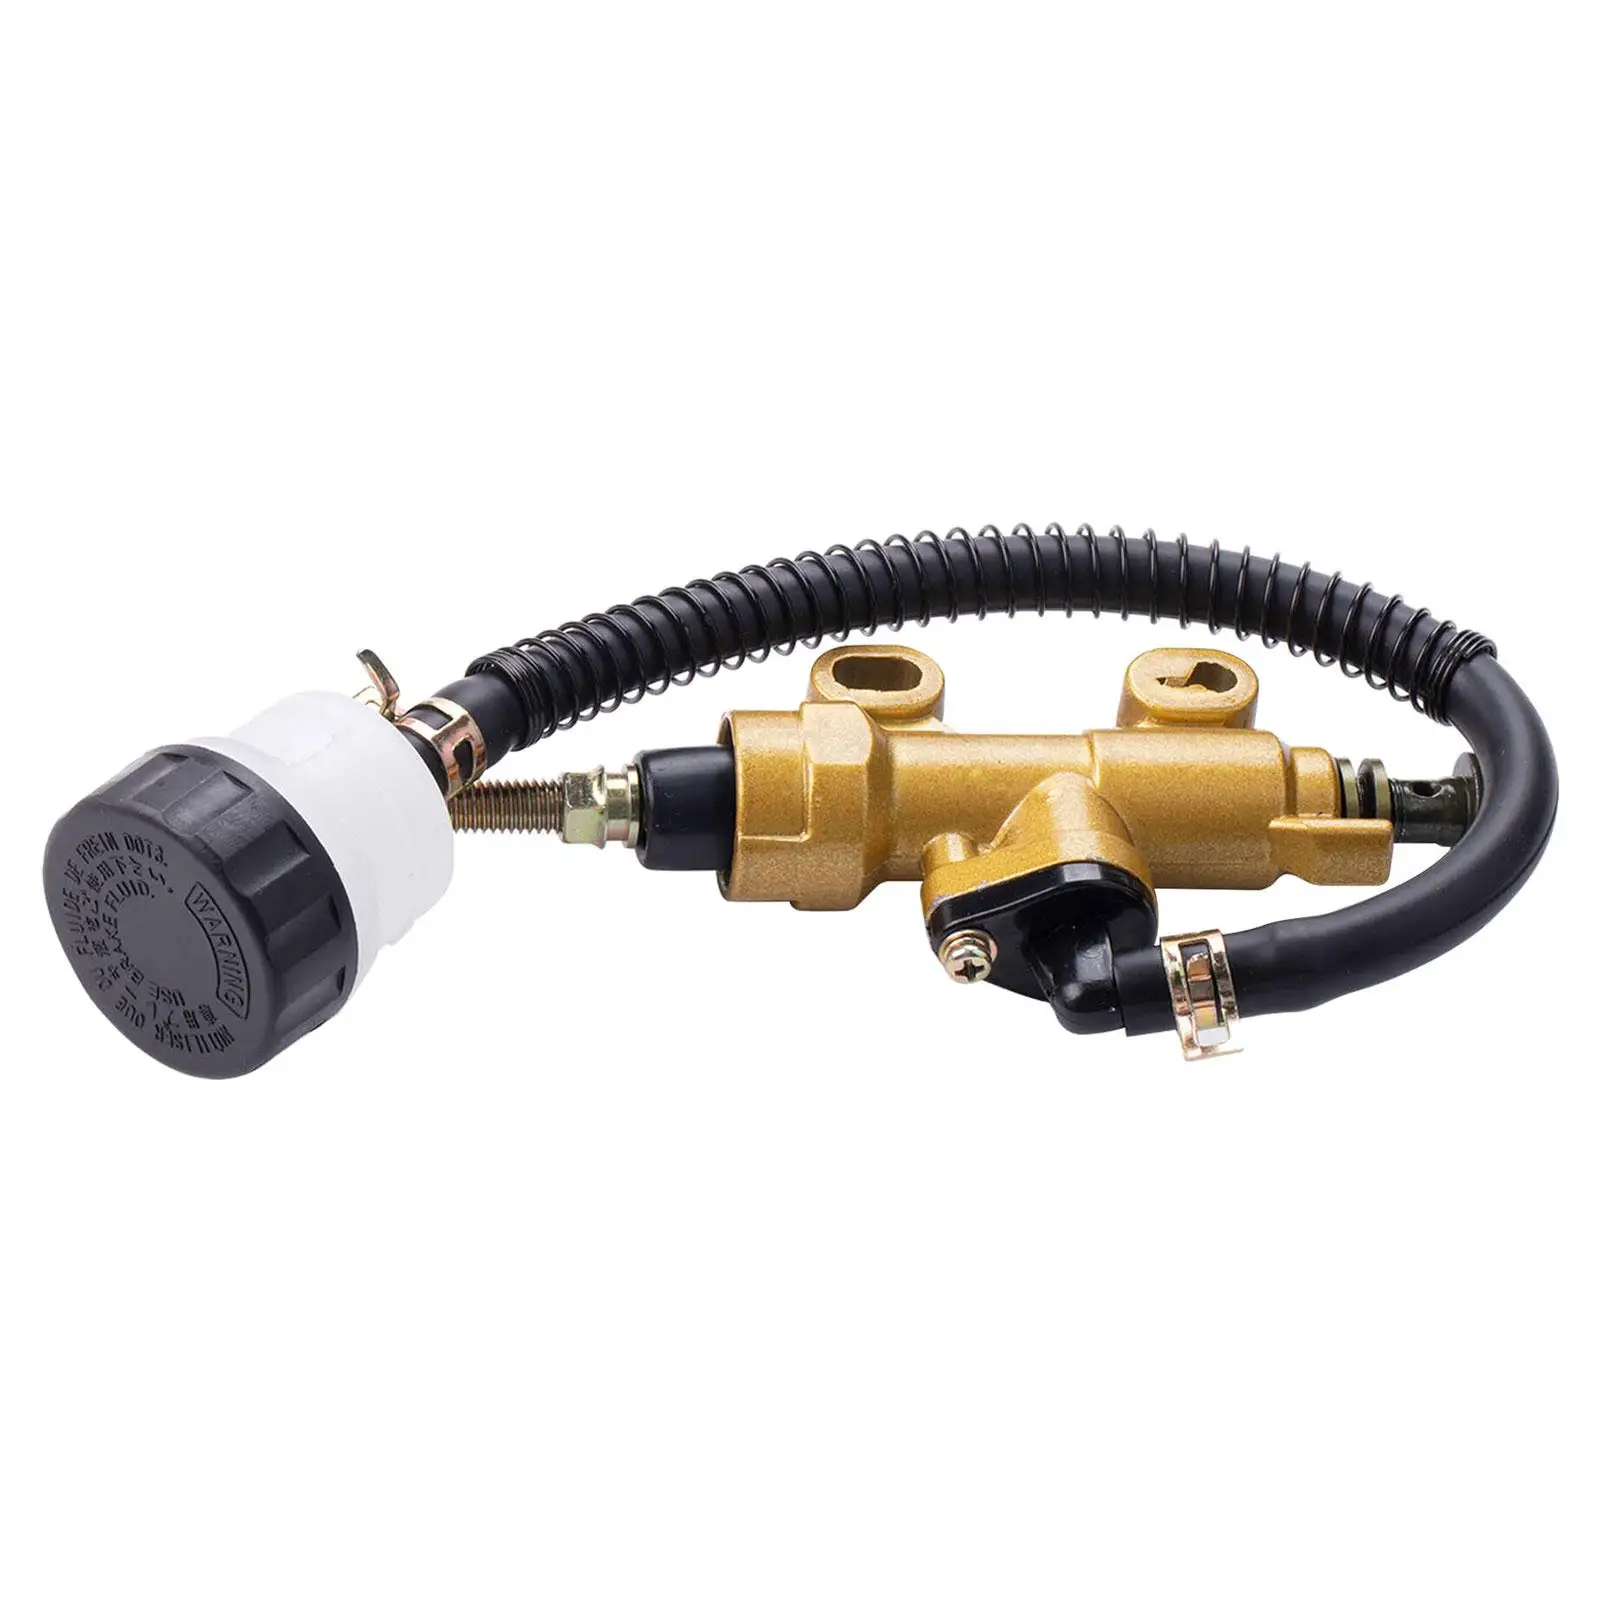 Motorcycle Rear Foot Master Cylinder Brake Pump for Honda CB400 600 900 Stable Performance Easy Installation